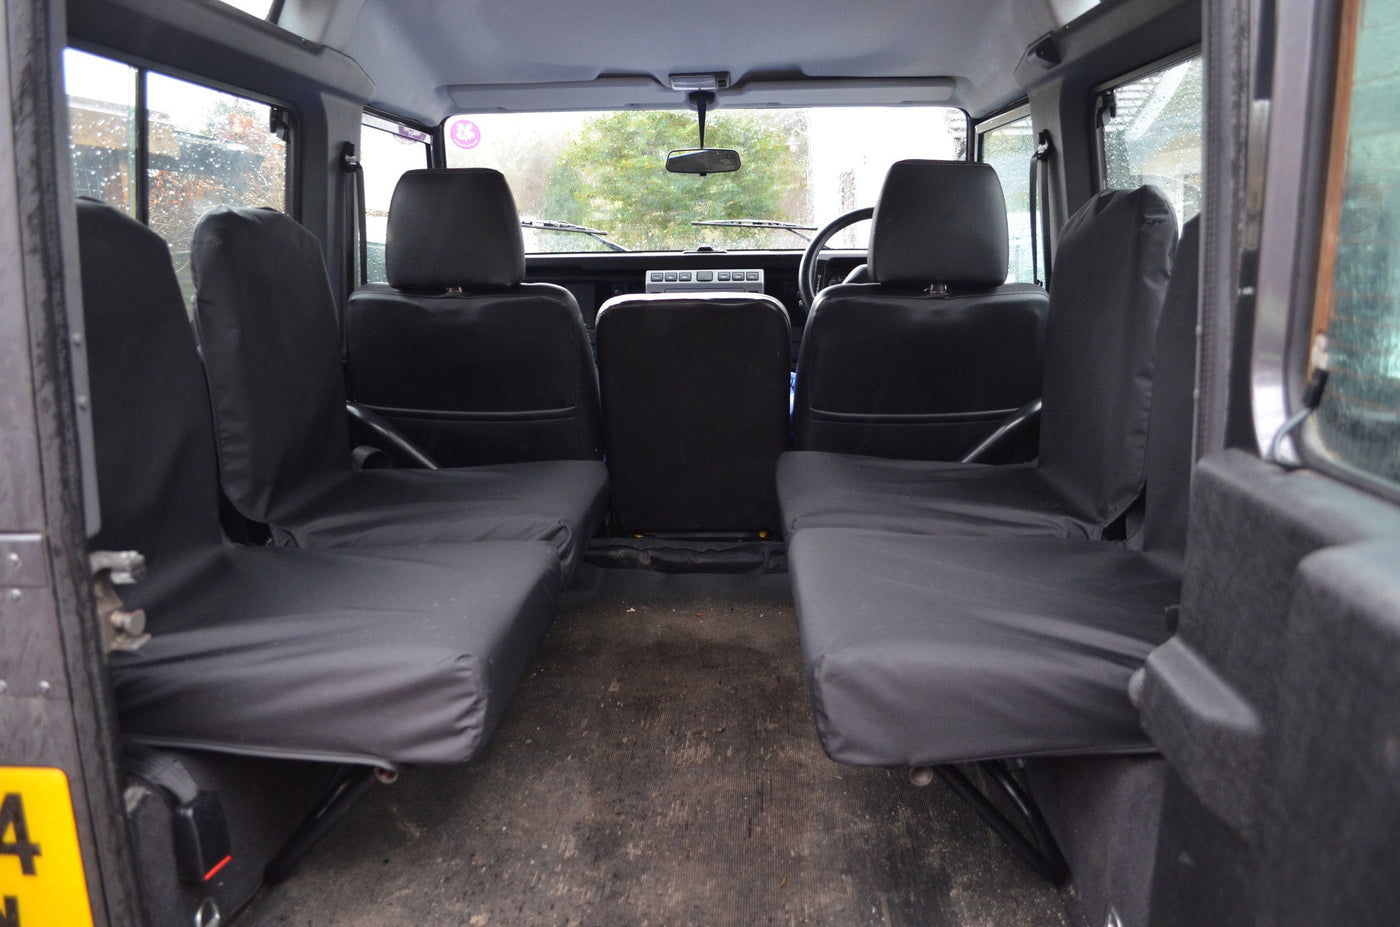 Land Rover Defender 1983 - 2007 Rear Seat Covers Set of 4 Dicky Seats / Black Scutes Ltd